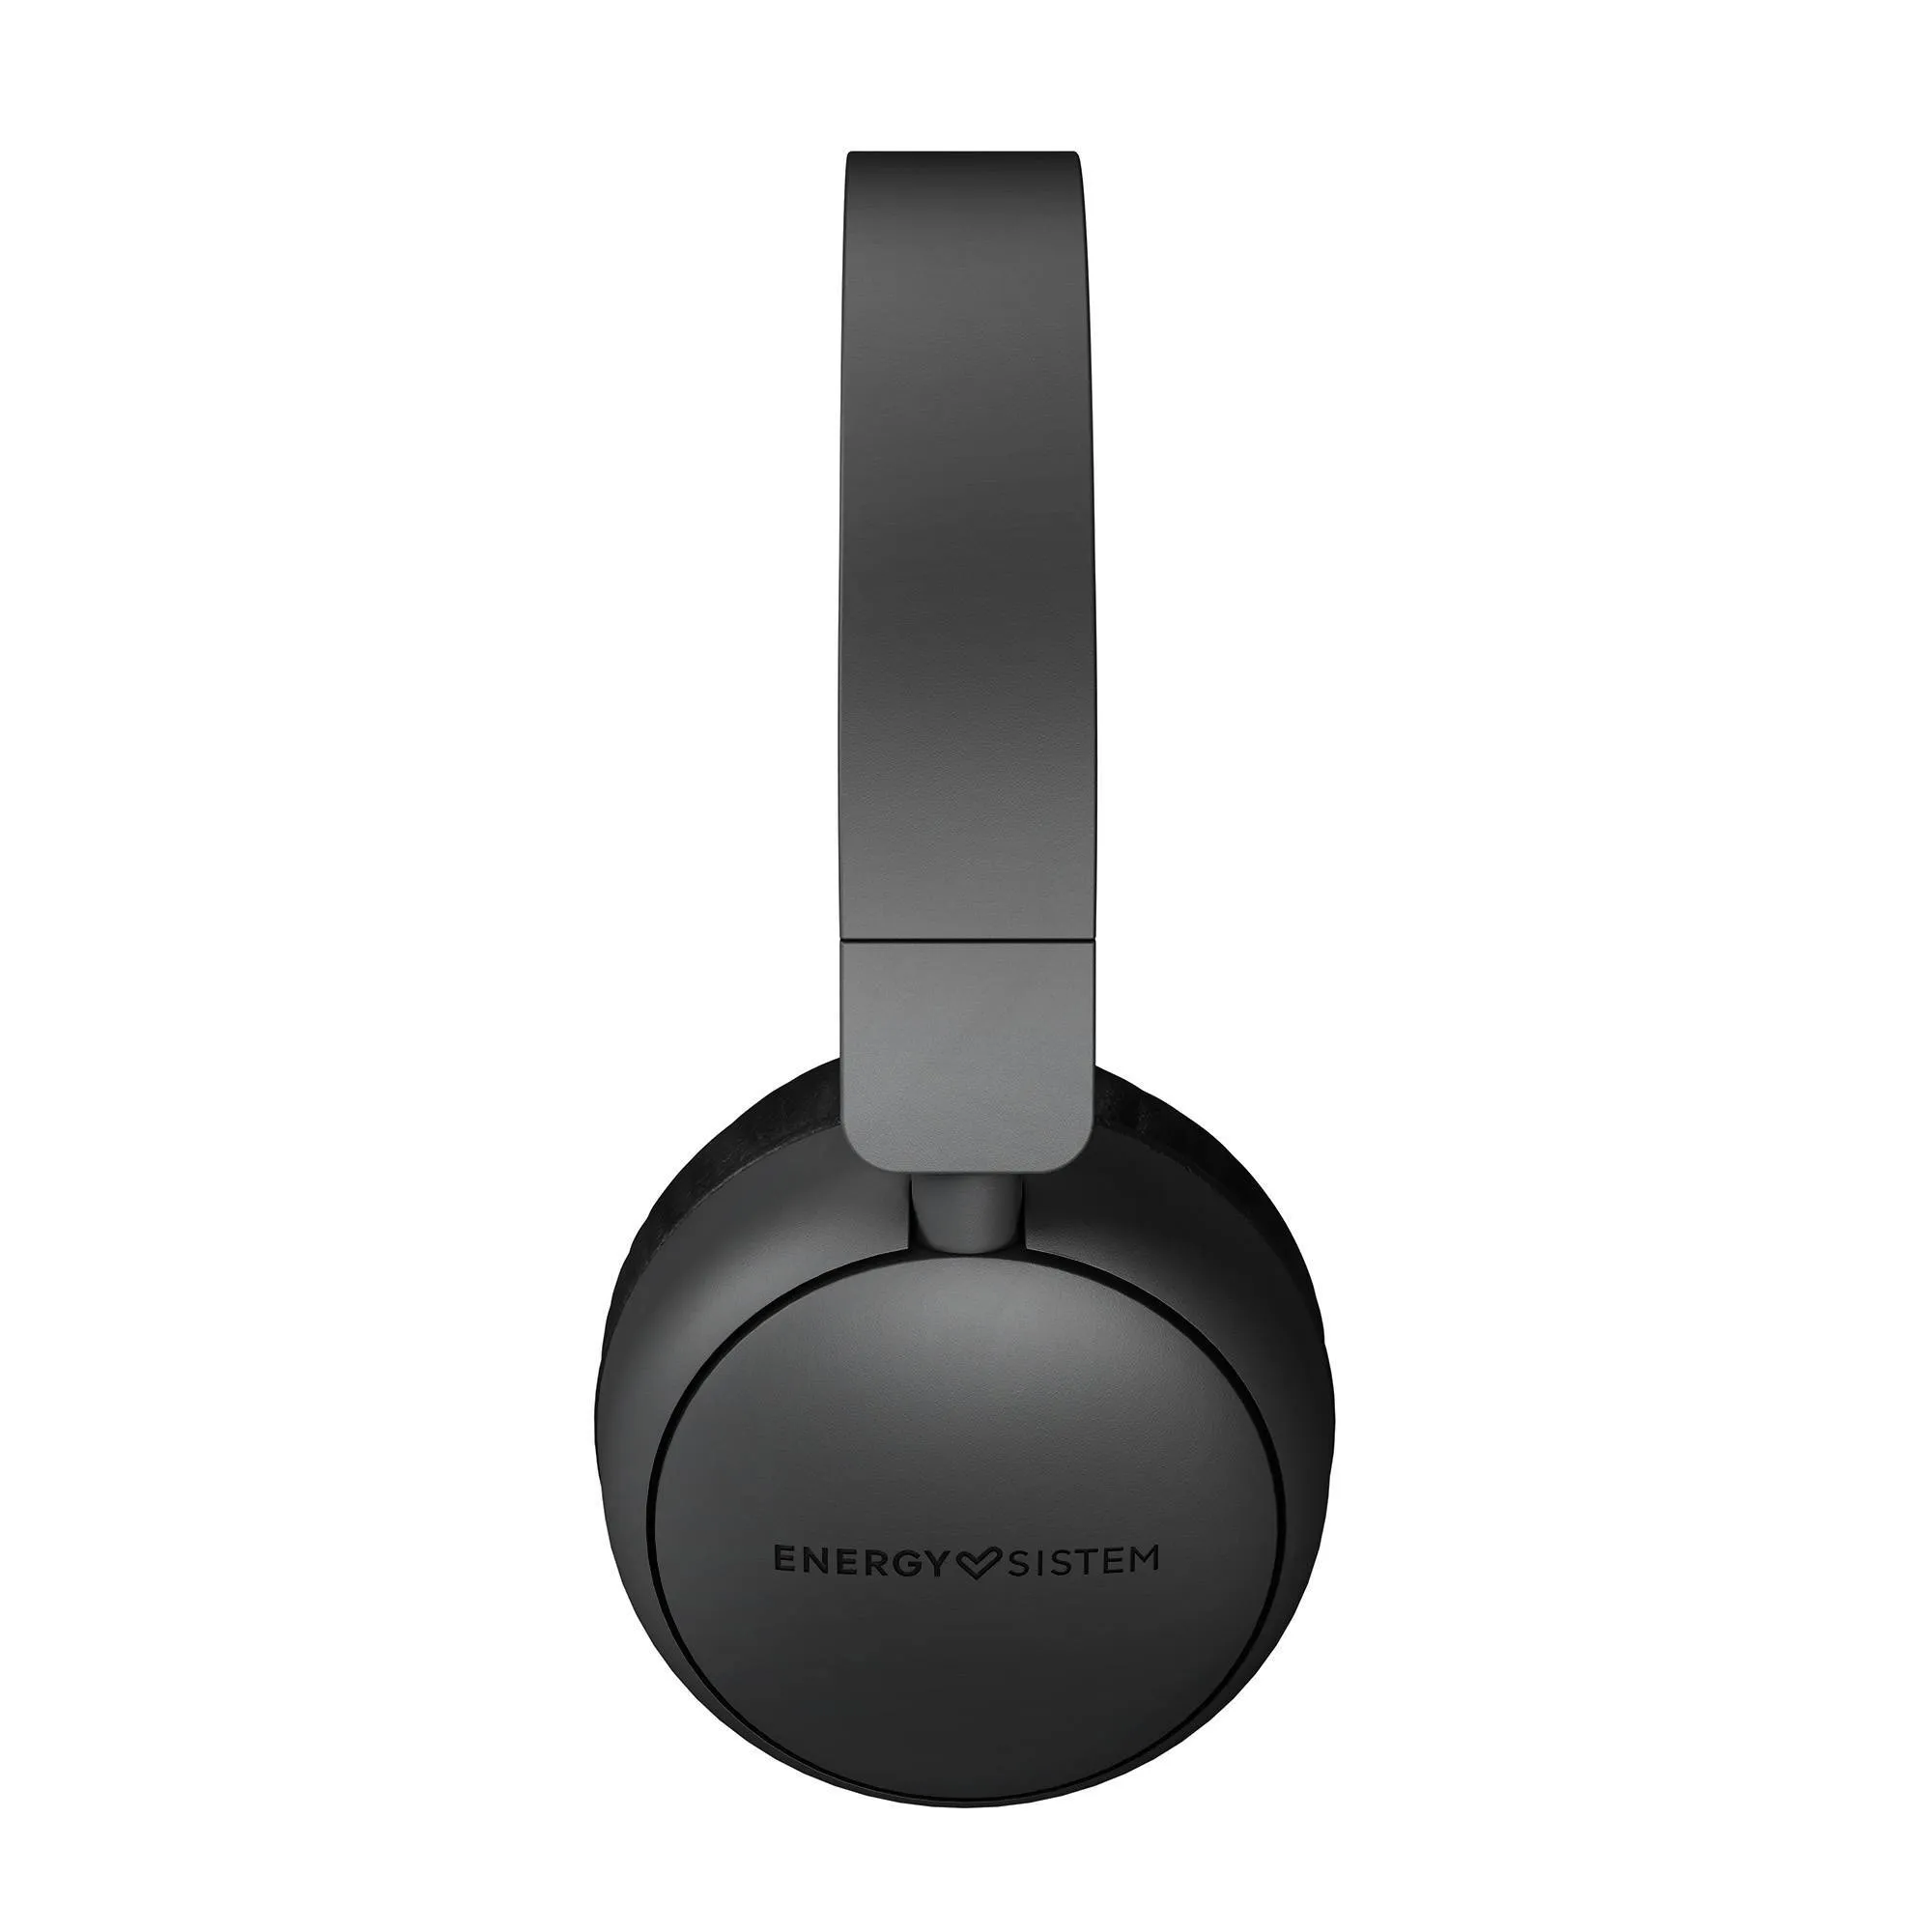 Soundspire headphones with over-ear design that covers the whole ear for a greater sense of isolation